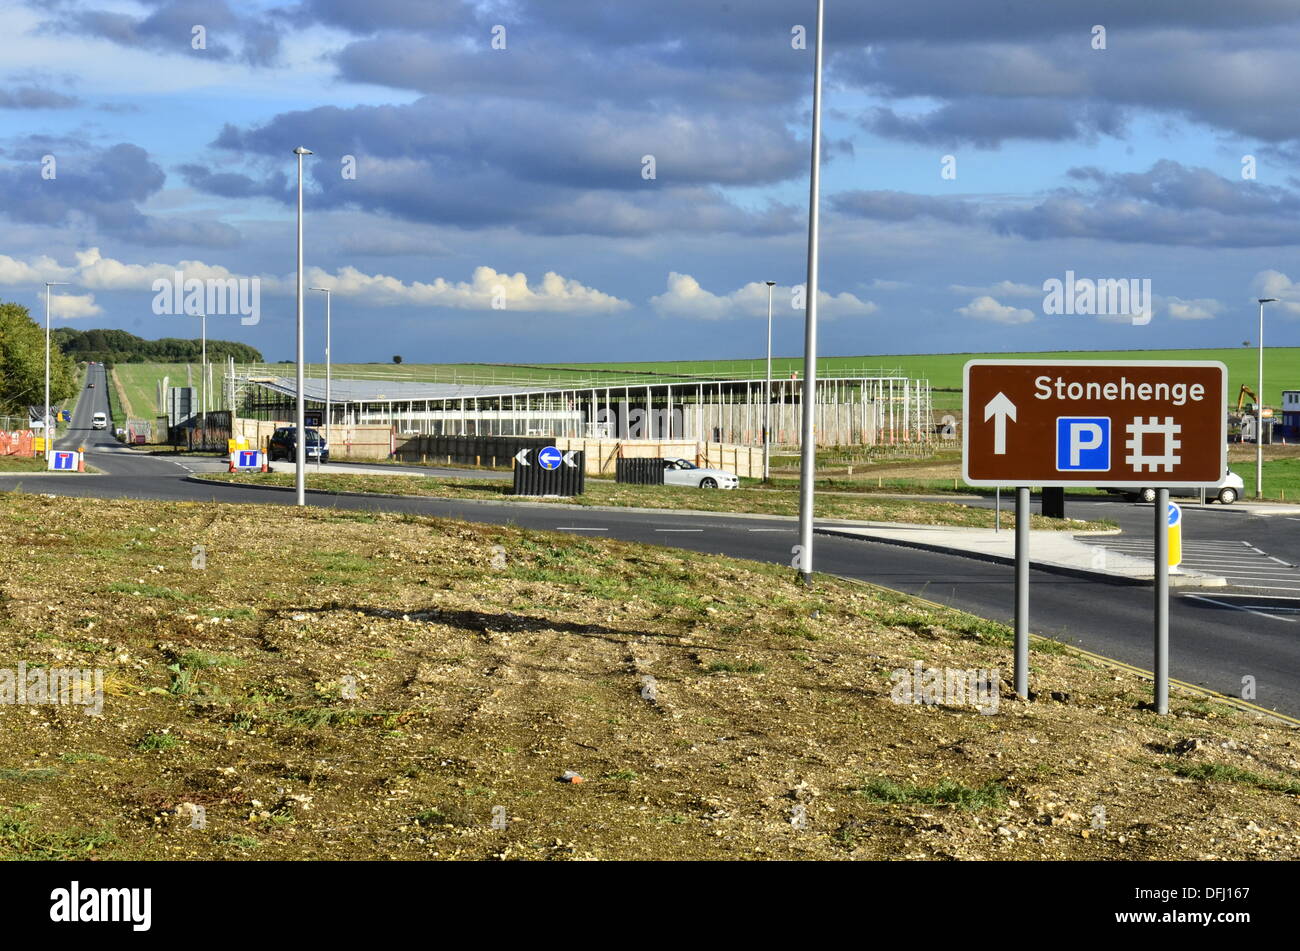 Stonehenge, Wiltshire, UK. 5th October 2013. .The building of the New Visitor Center complete with new road layout. Robert Timoney/AlamyLiveNews. Stock Photo